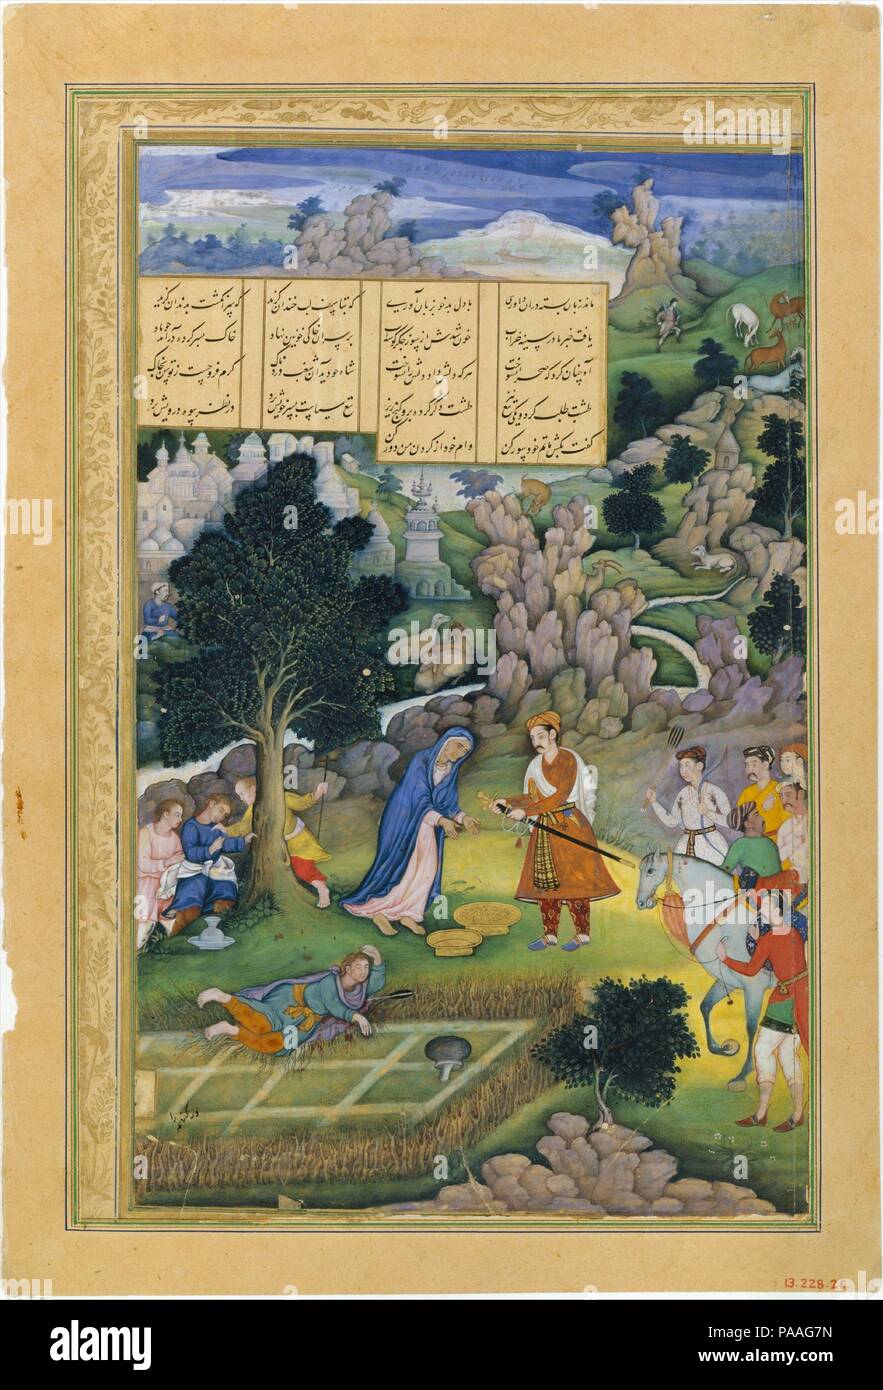 'A King Offers to Make Amends to a Bereaved Mother', Folio from a Khamsa (Quintet) of Amir Khusrau Dihlavi. Artist: Painting attributed to Miskin (active ca. 1570-1604). Dimensions: H. 9 3/4 in. .(24.8 cm)  W. 6 1/4 in. (15.9 cm). Poet: Amir Khusrau Dihlavi (1253-1325). Date: 1597-98.  In this dramatic painting, a king submits to justice after having accidentally killed a shepherd while hunting. He offers the boy's grieving mother a choice: to take his sword and cut off his head, which will fall in the golden dish between them, or to accept the second dish filled with gold. Some of the margina Stock Photo